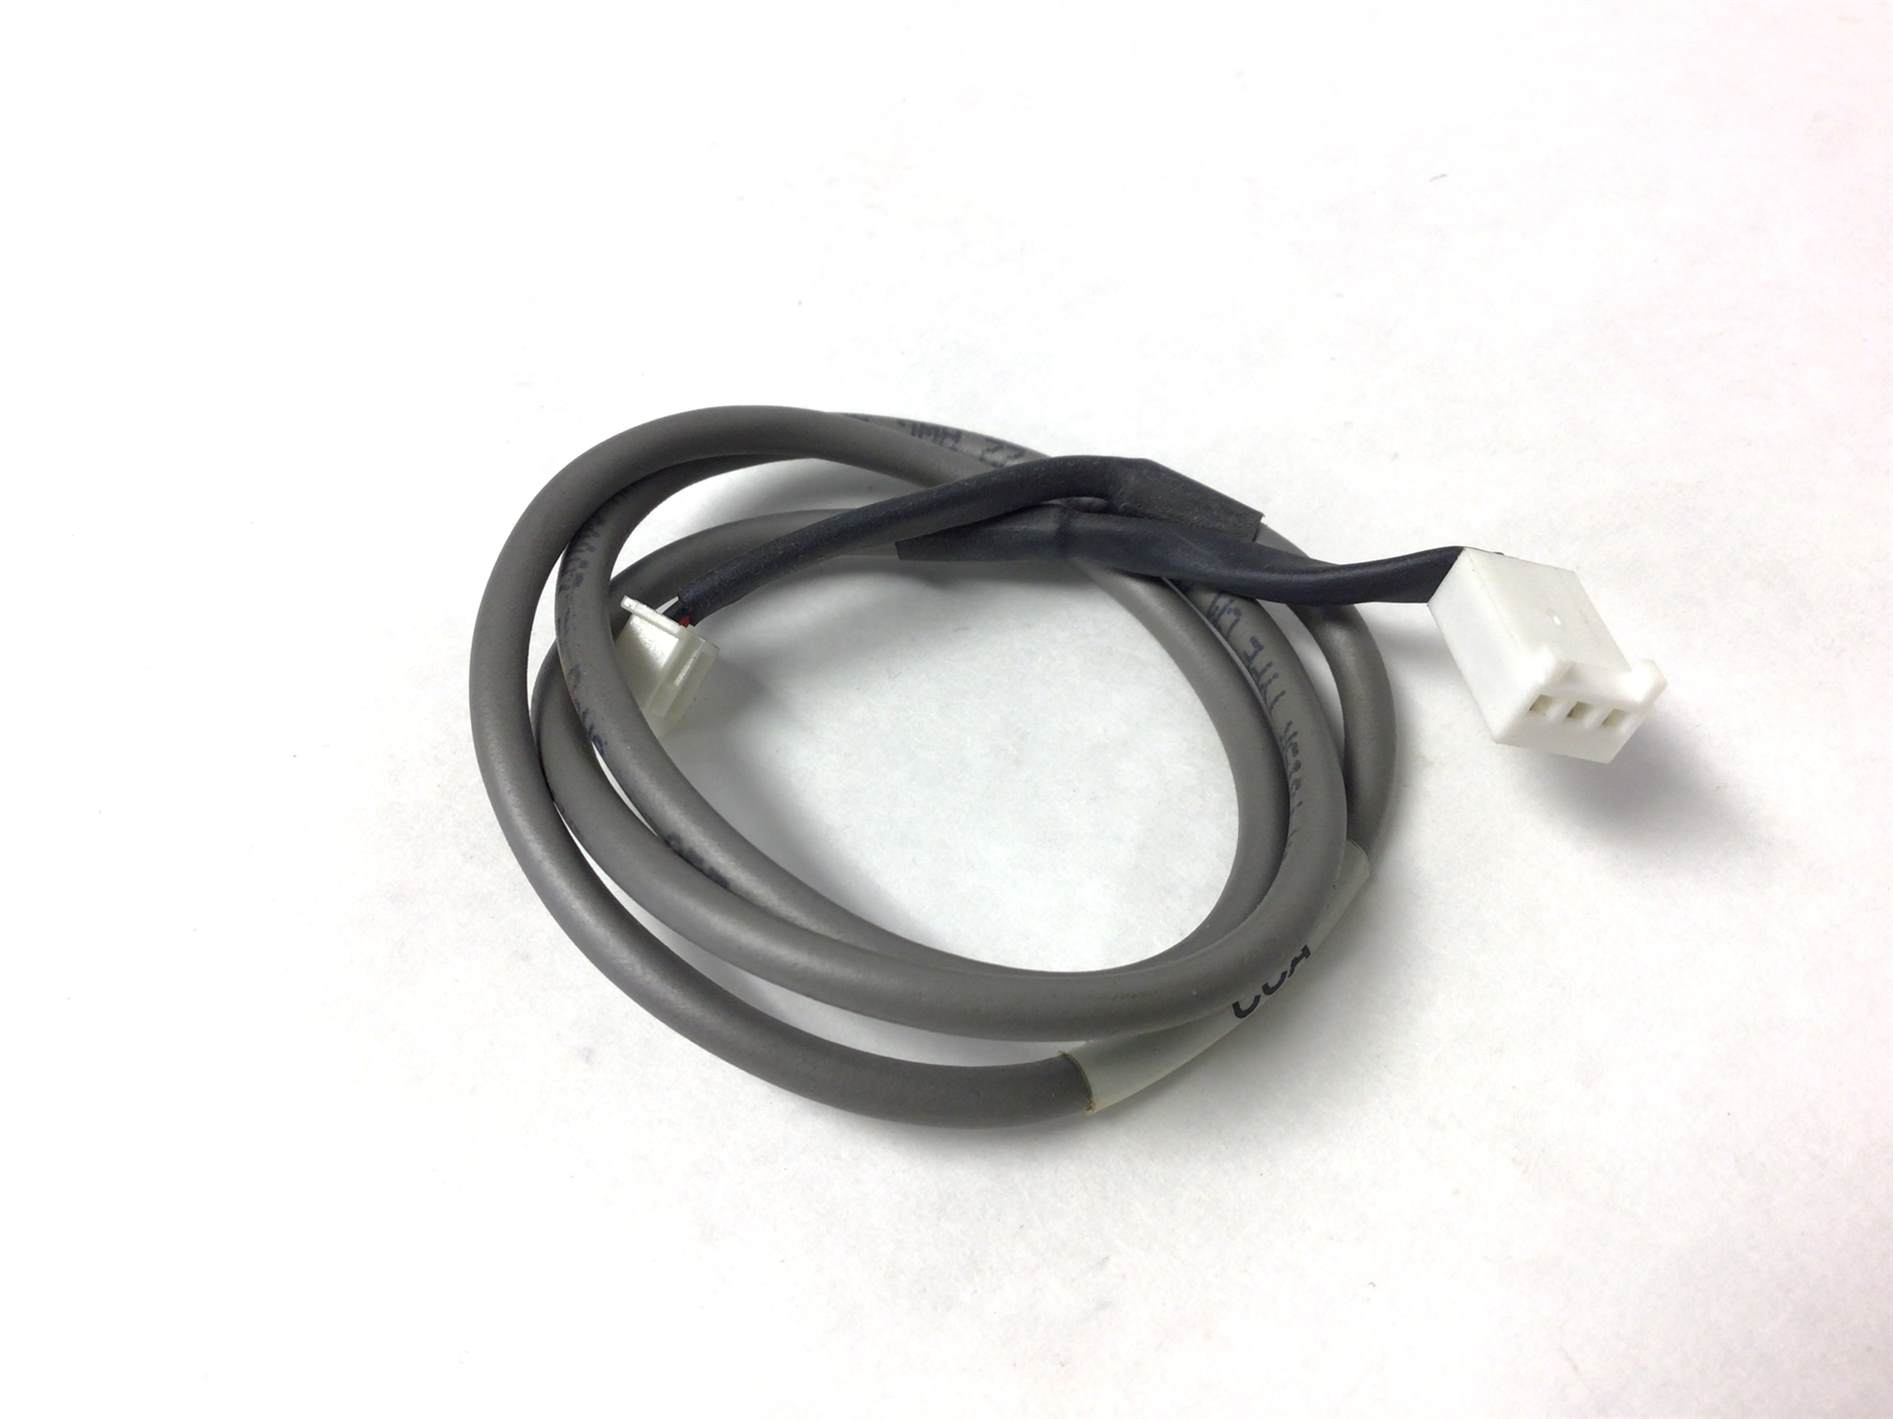 Contact Heart Rate Cable Wire Harness (Used)